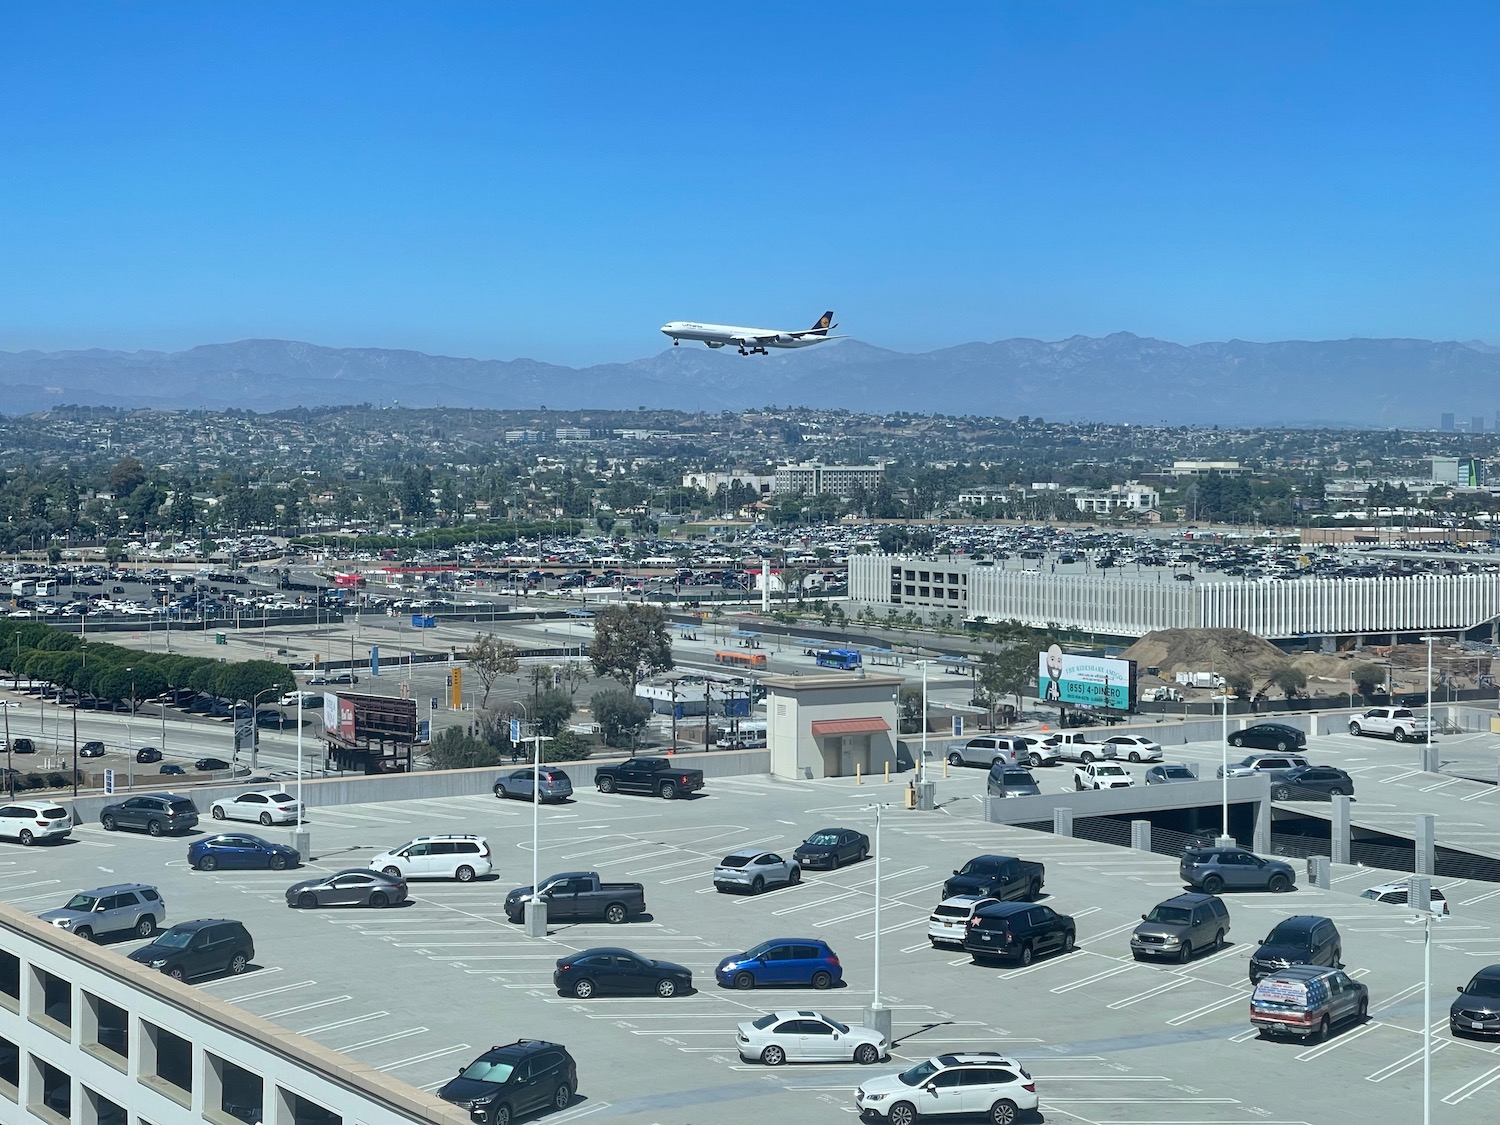 a plane flying over a parking lot